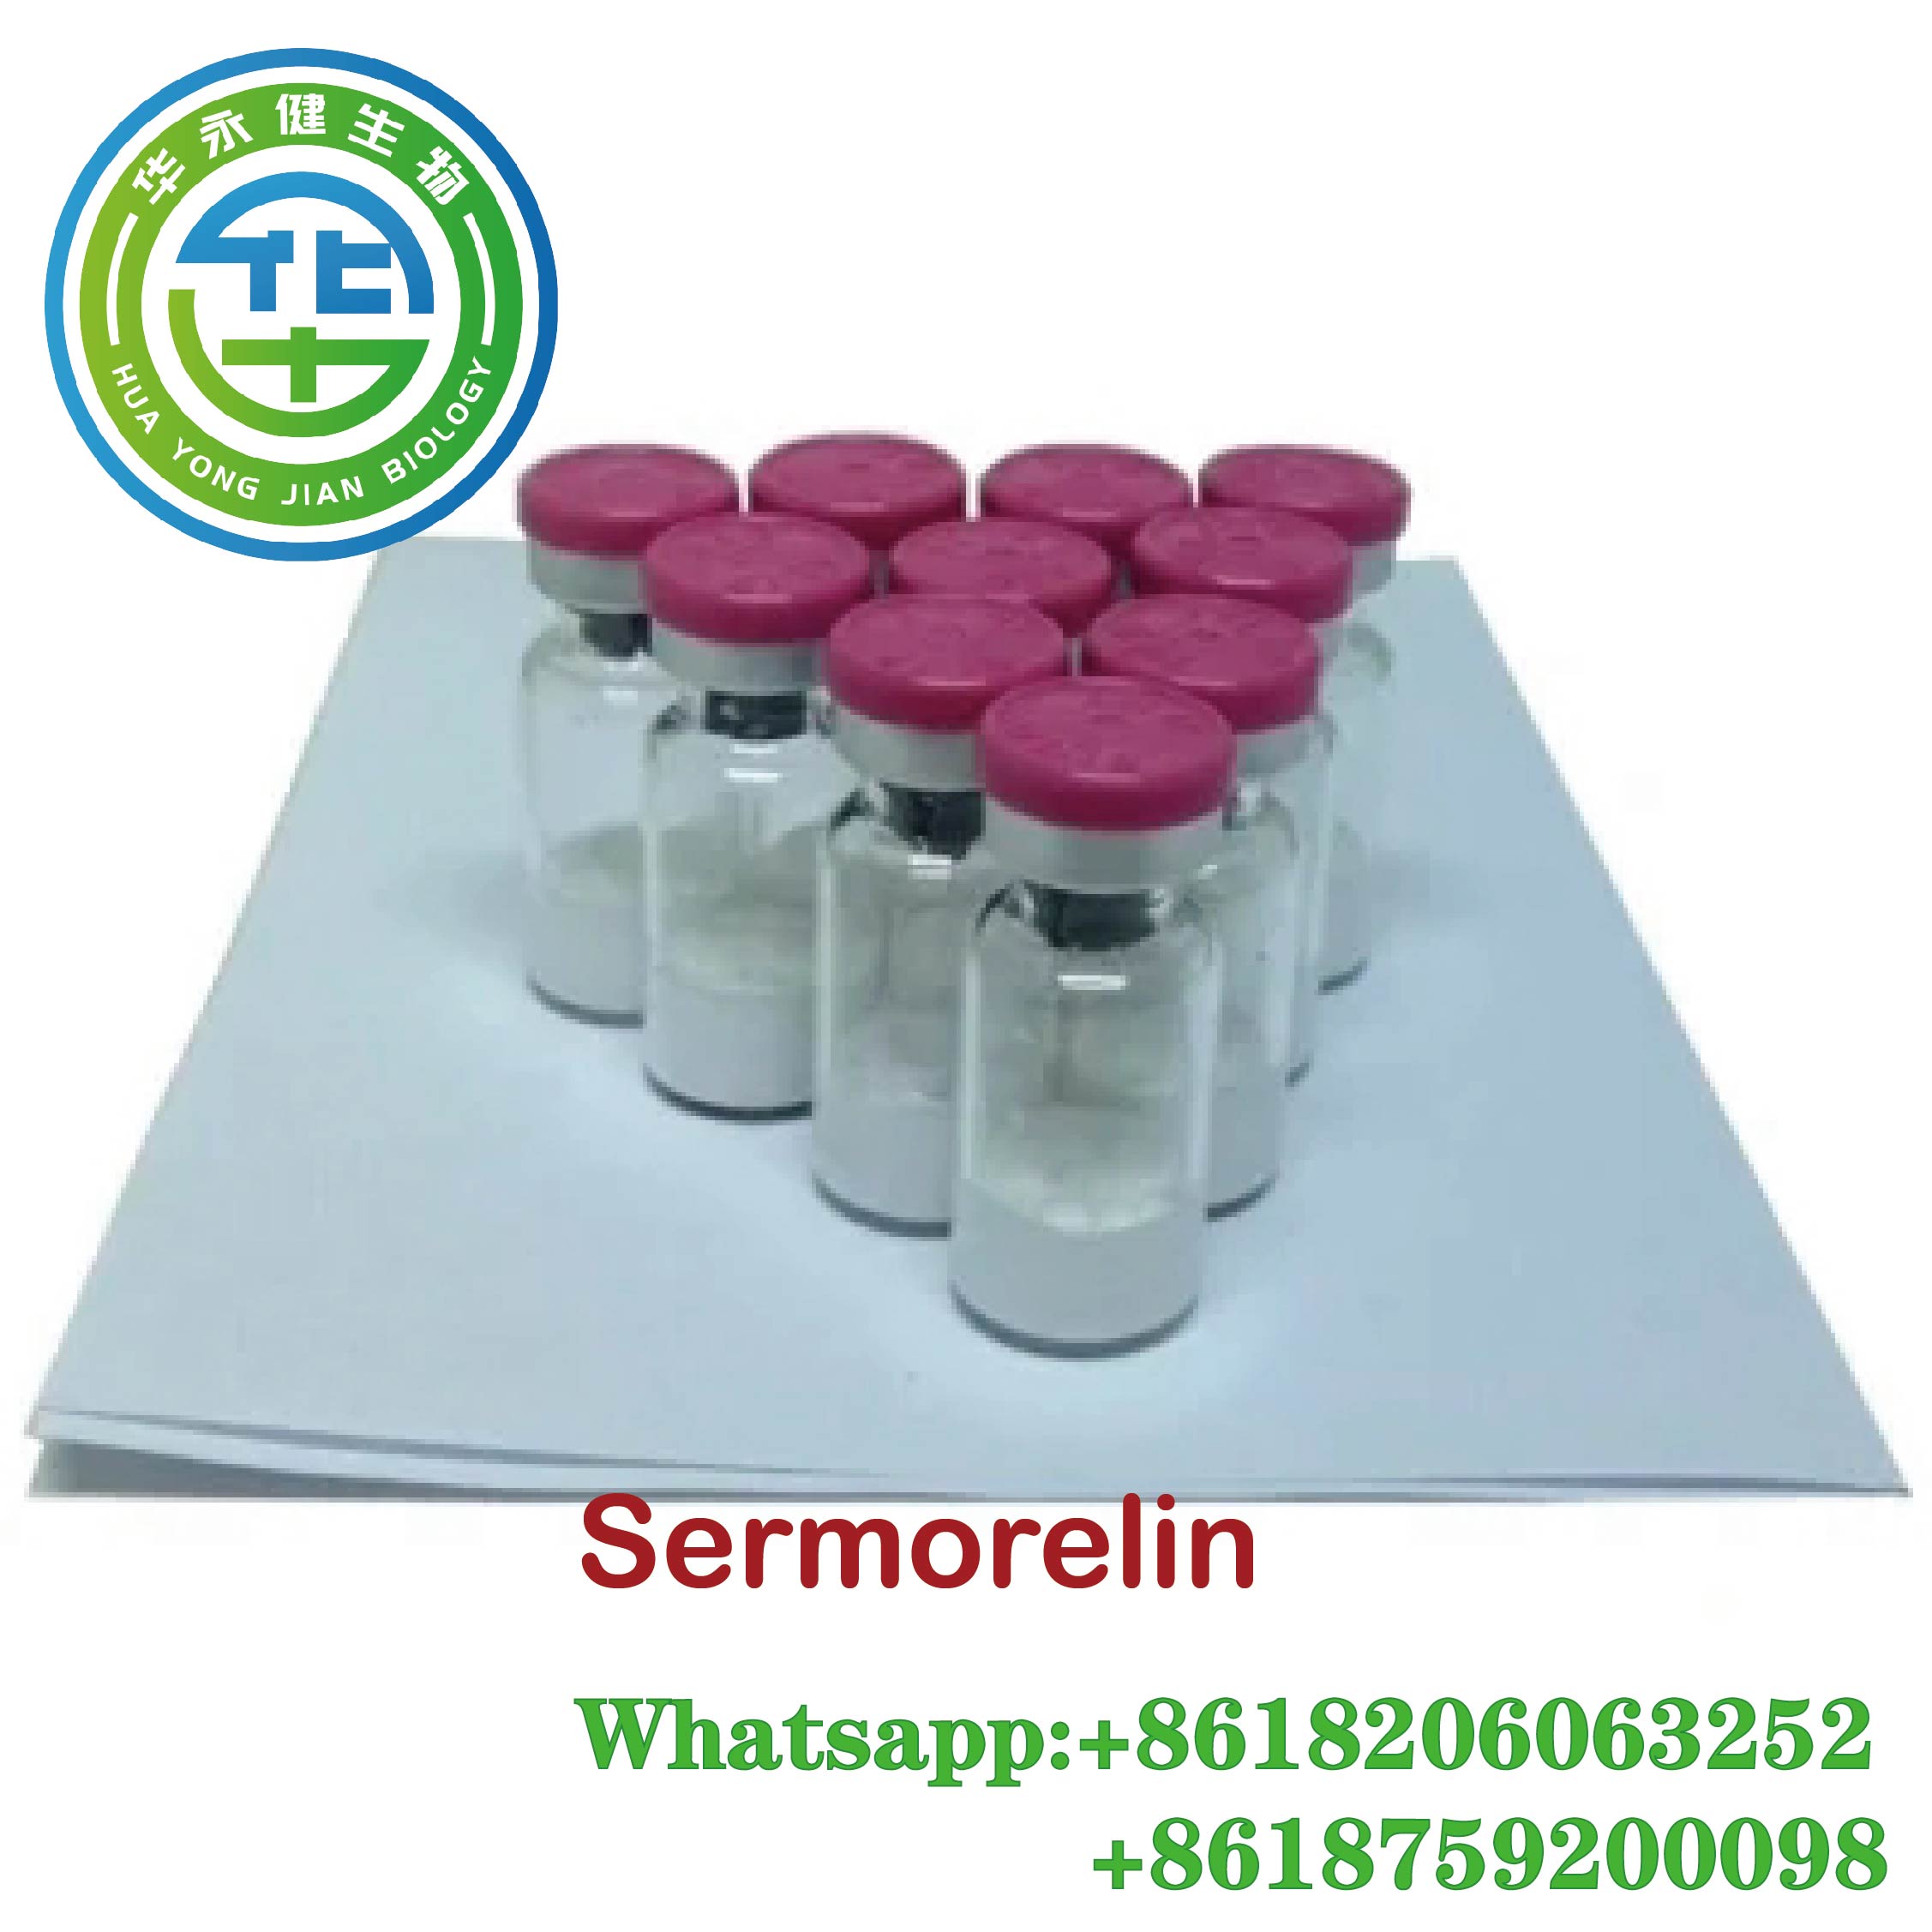 Growth Hormone Peptide Powder Sermorelin 2mg/Vial for Builds Lean Muscle  CAS 86168-78-7